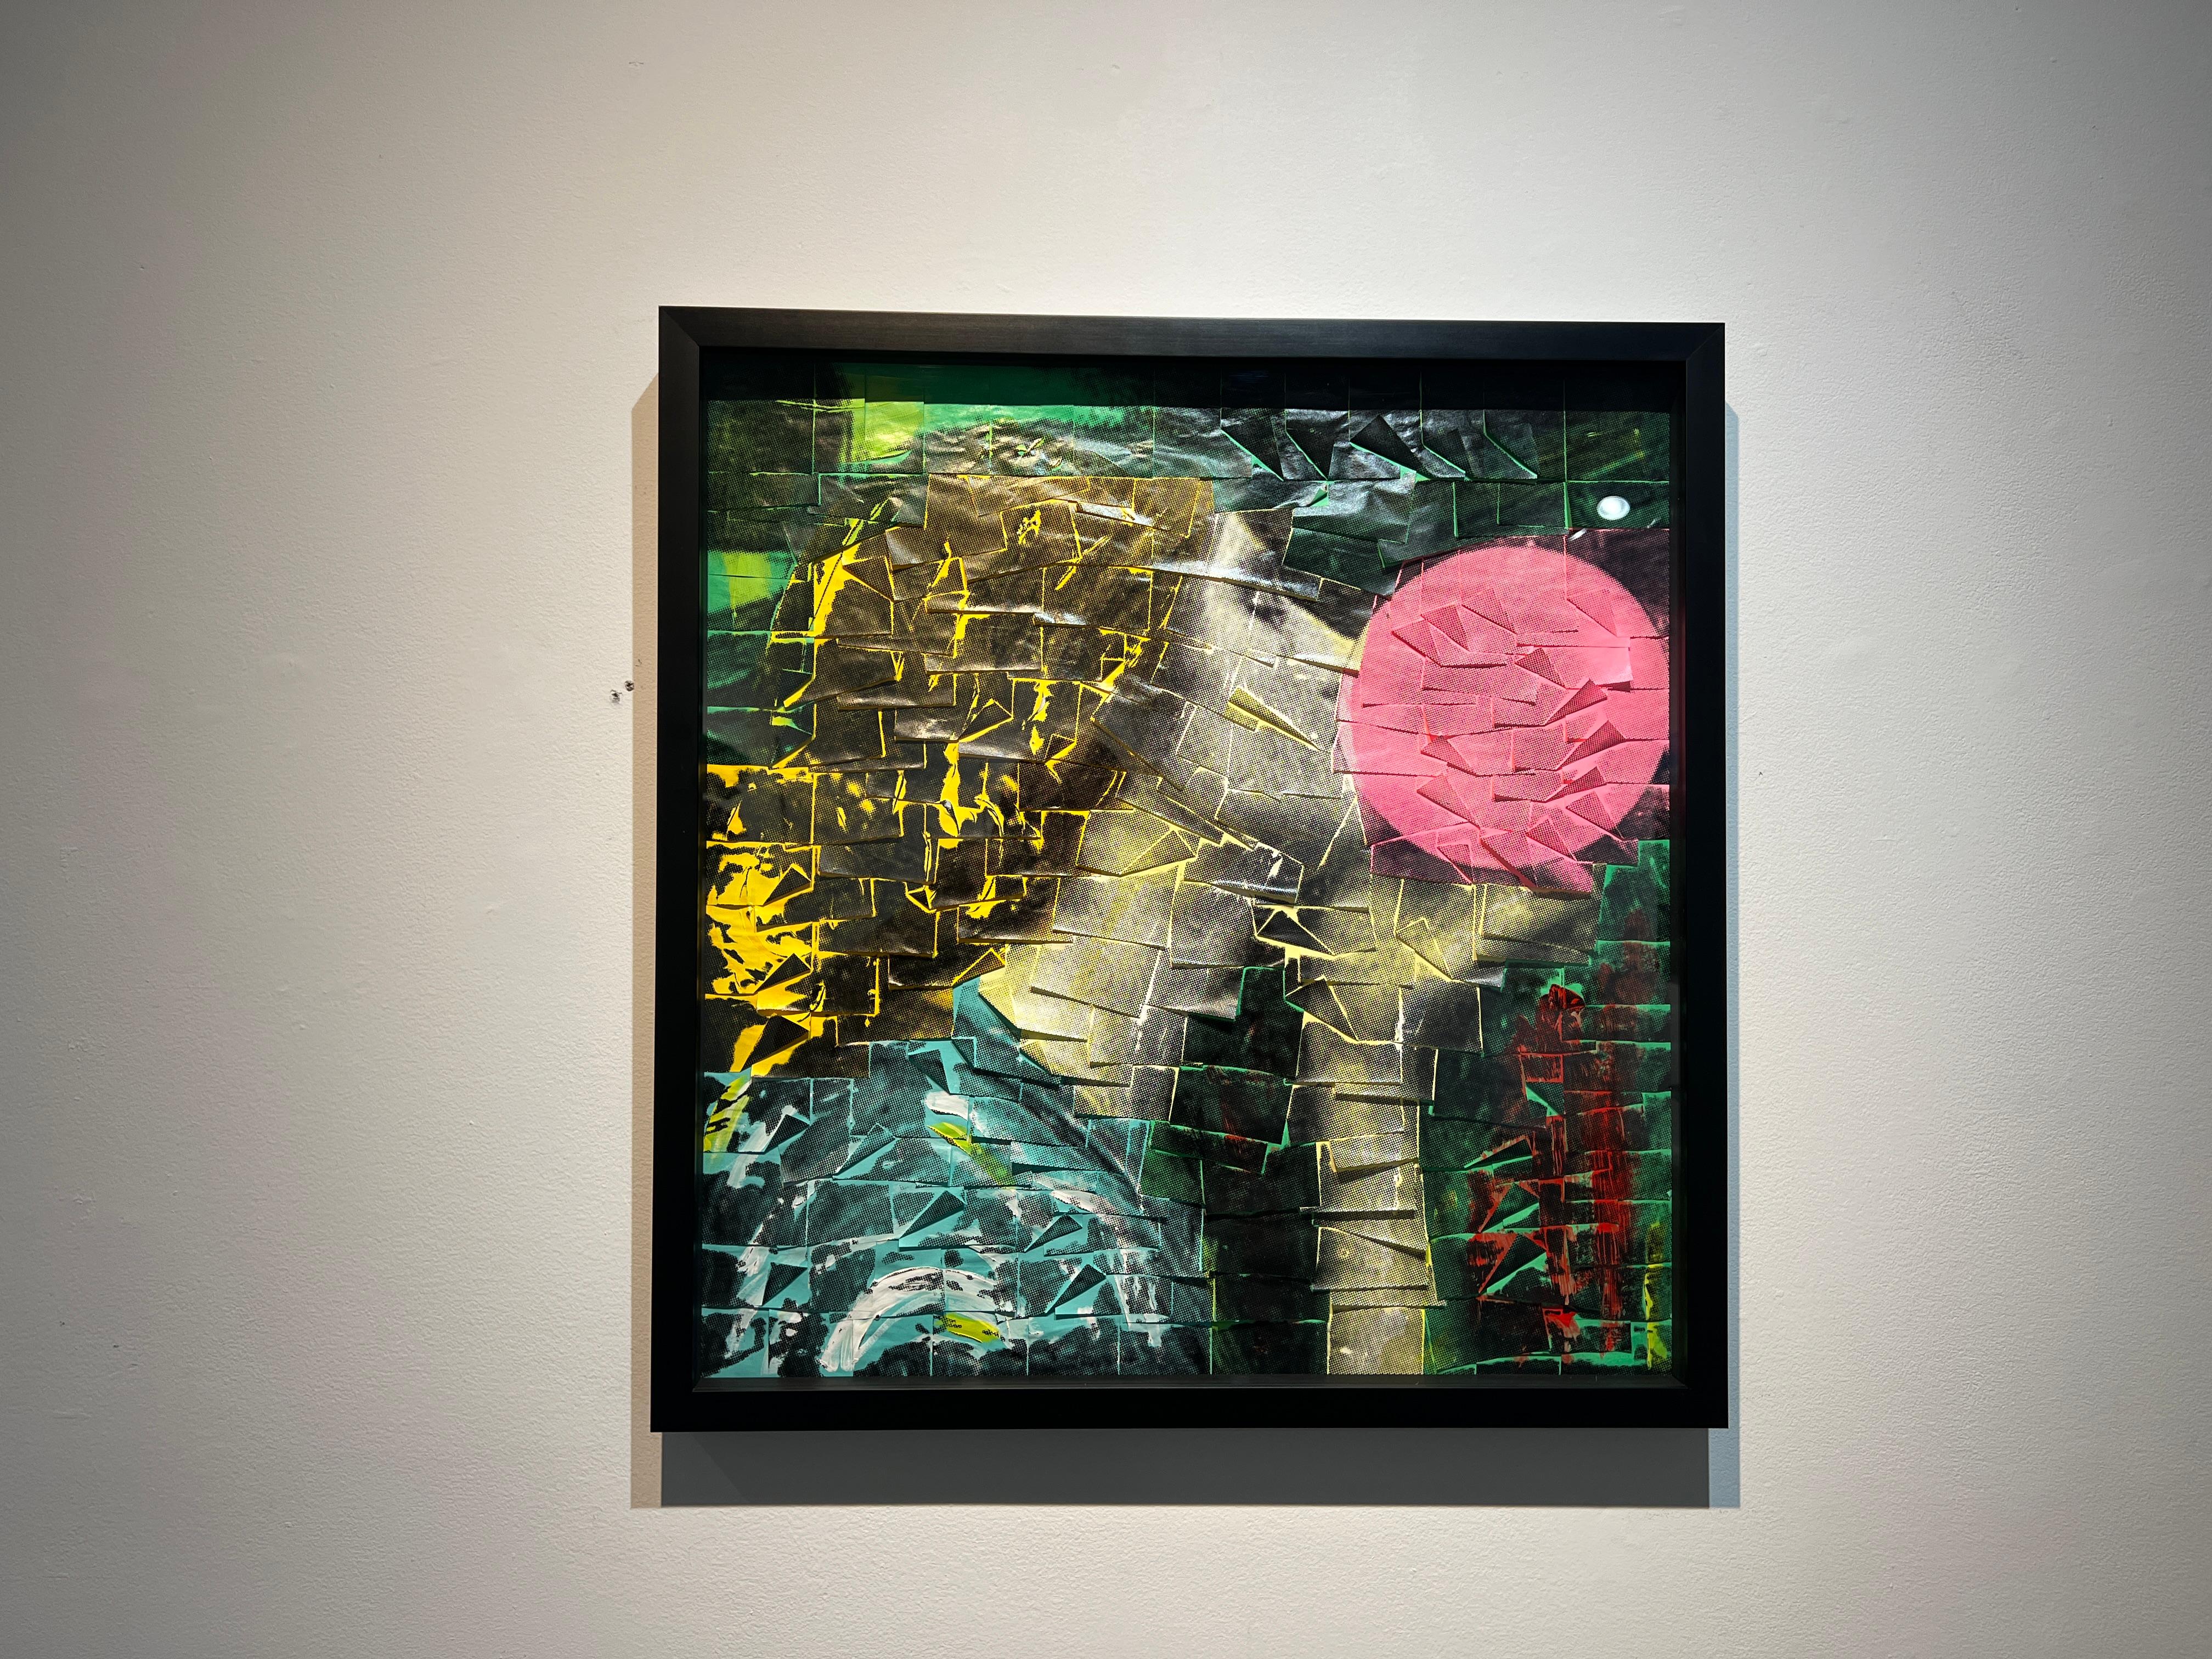 With the distinctive medium of post-it notes, Özmenoğlu re-contextualizes everyday objects from something ordinary to a beautiful work of art. The individualized behavior of each post-it note results in a unique mosaic-like effect with some pieces